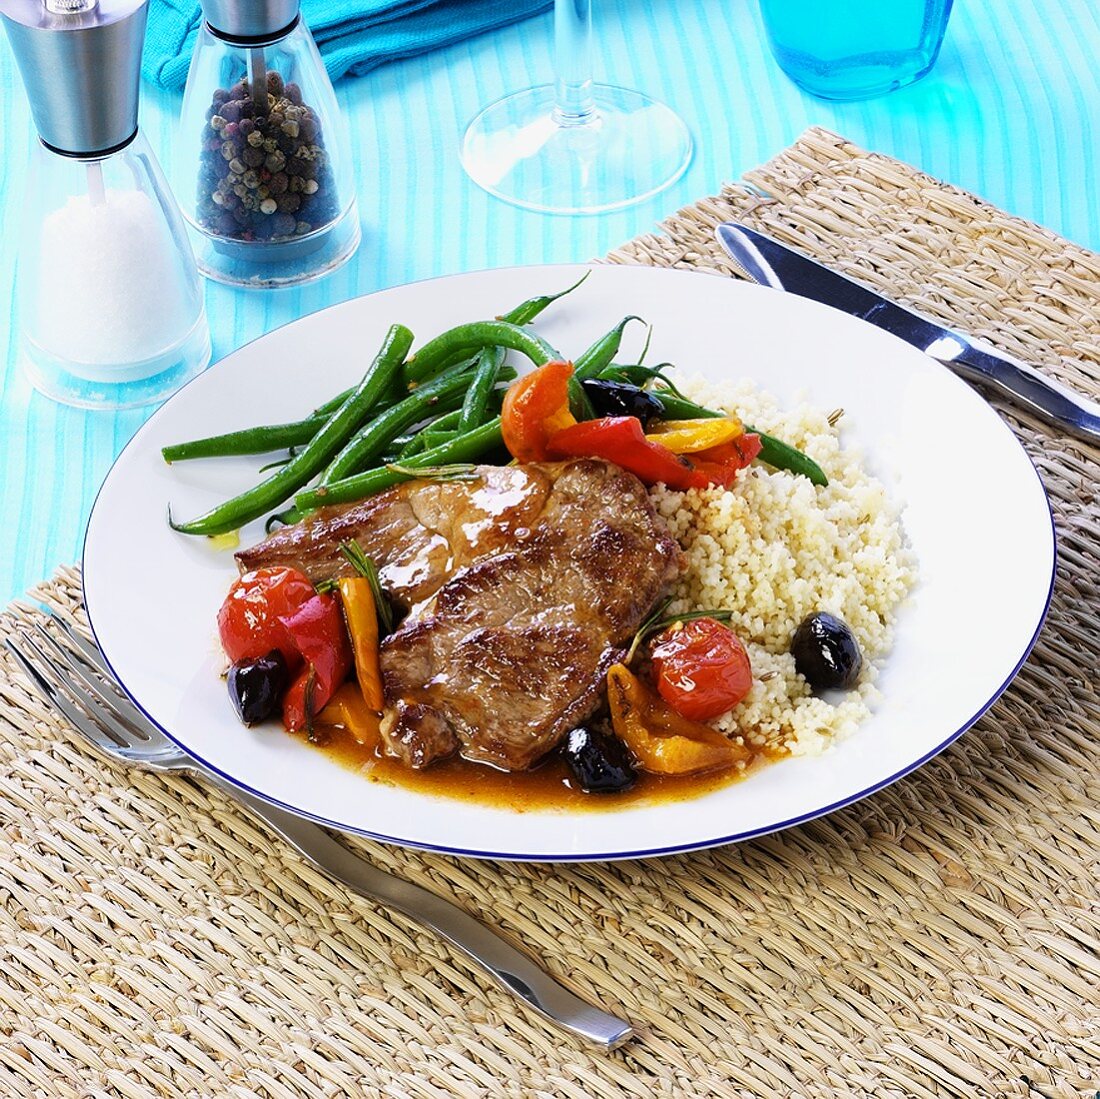 Pork neck steak with couscous and roasted vegetables